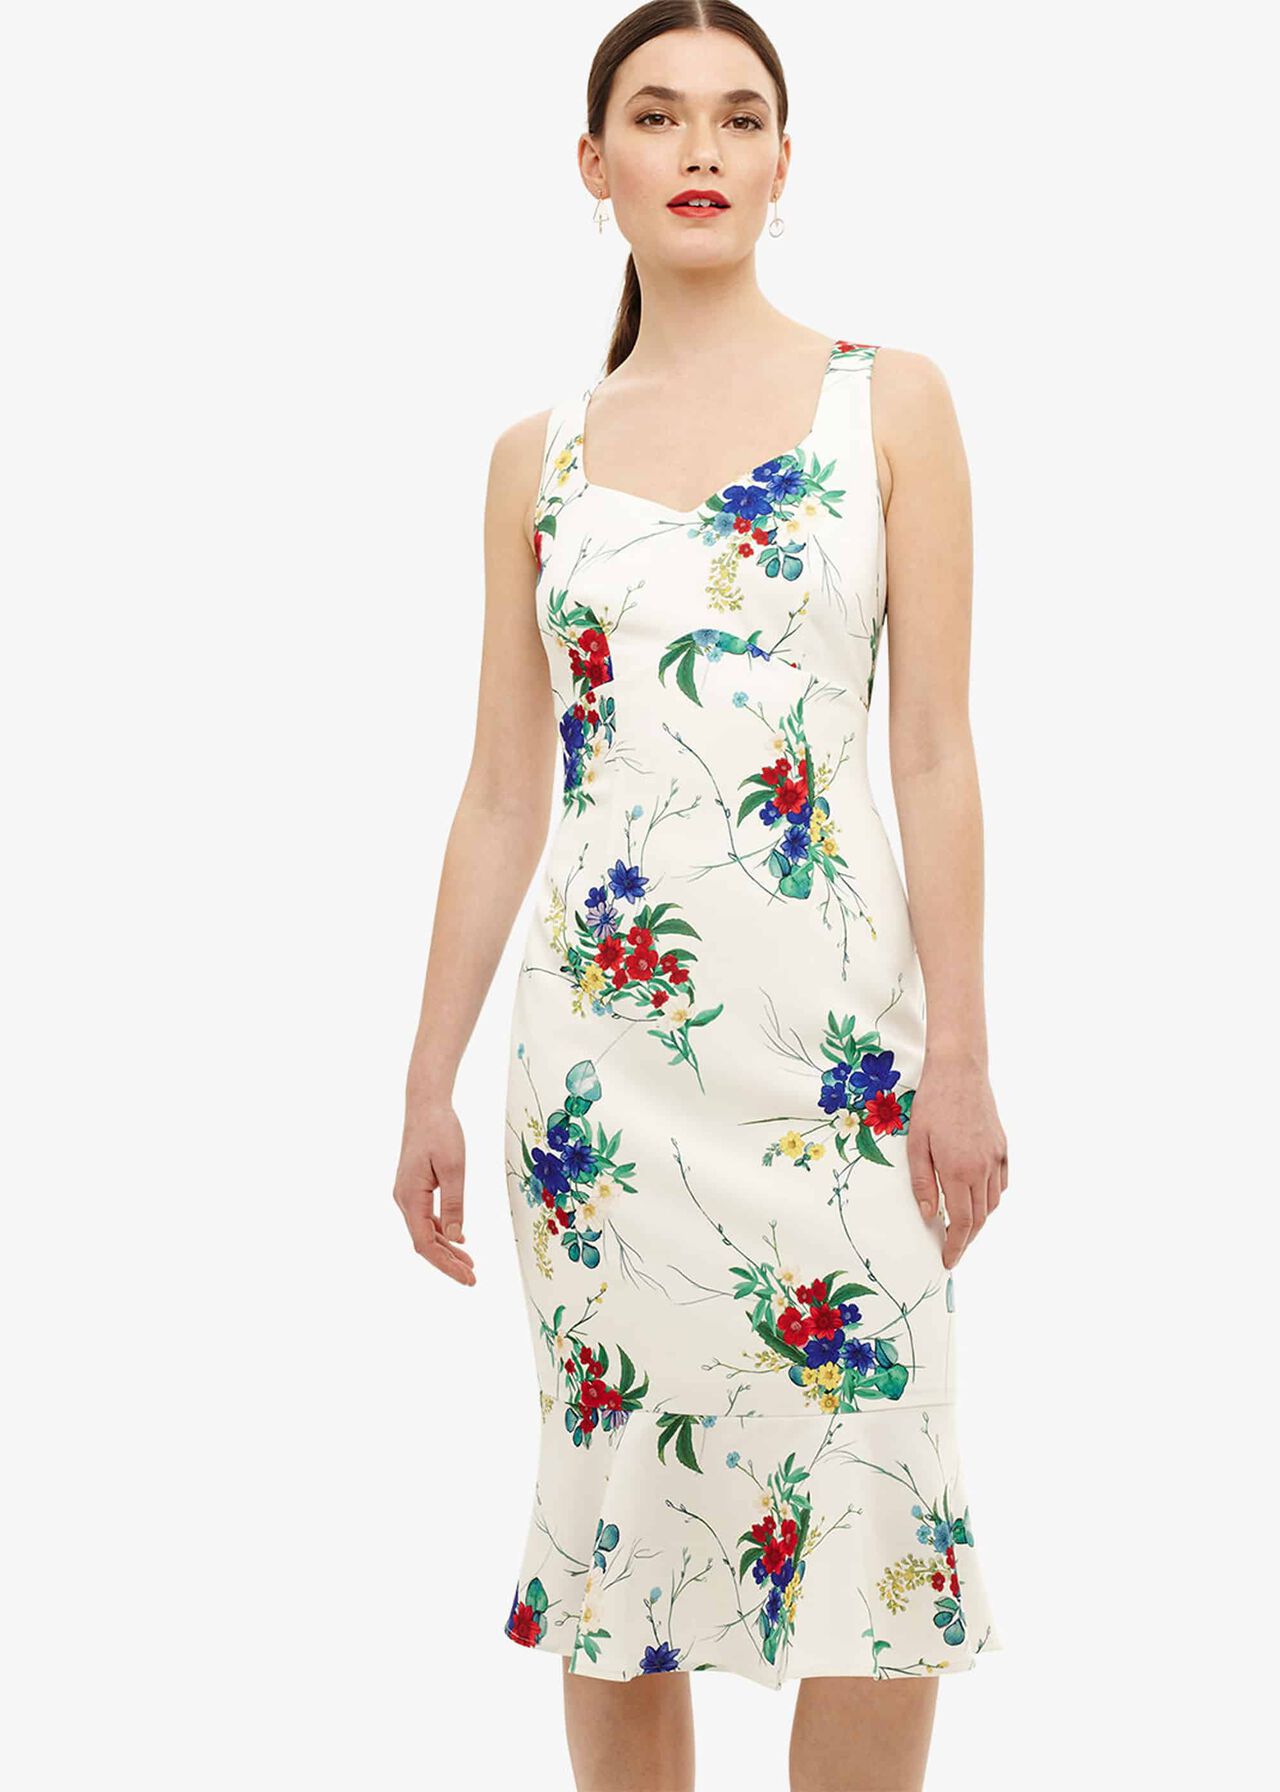 Bethania Floral Dress